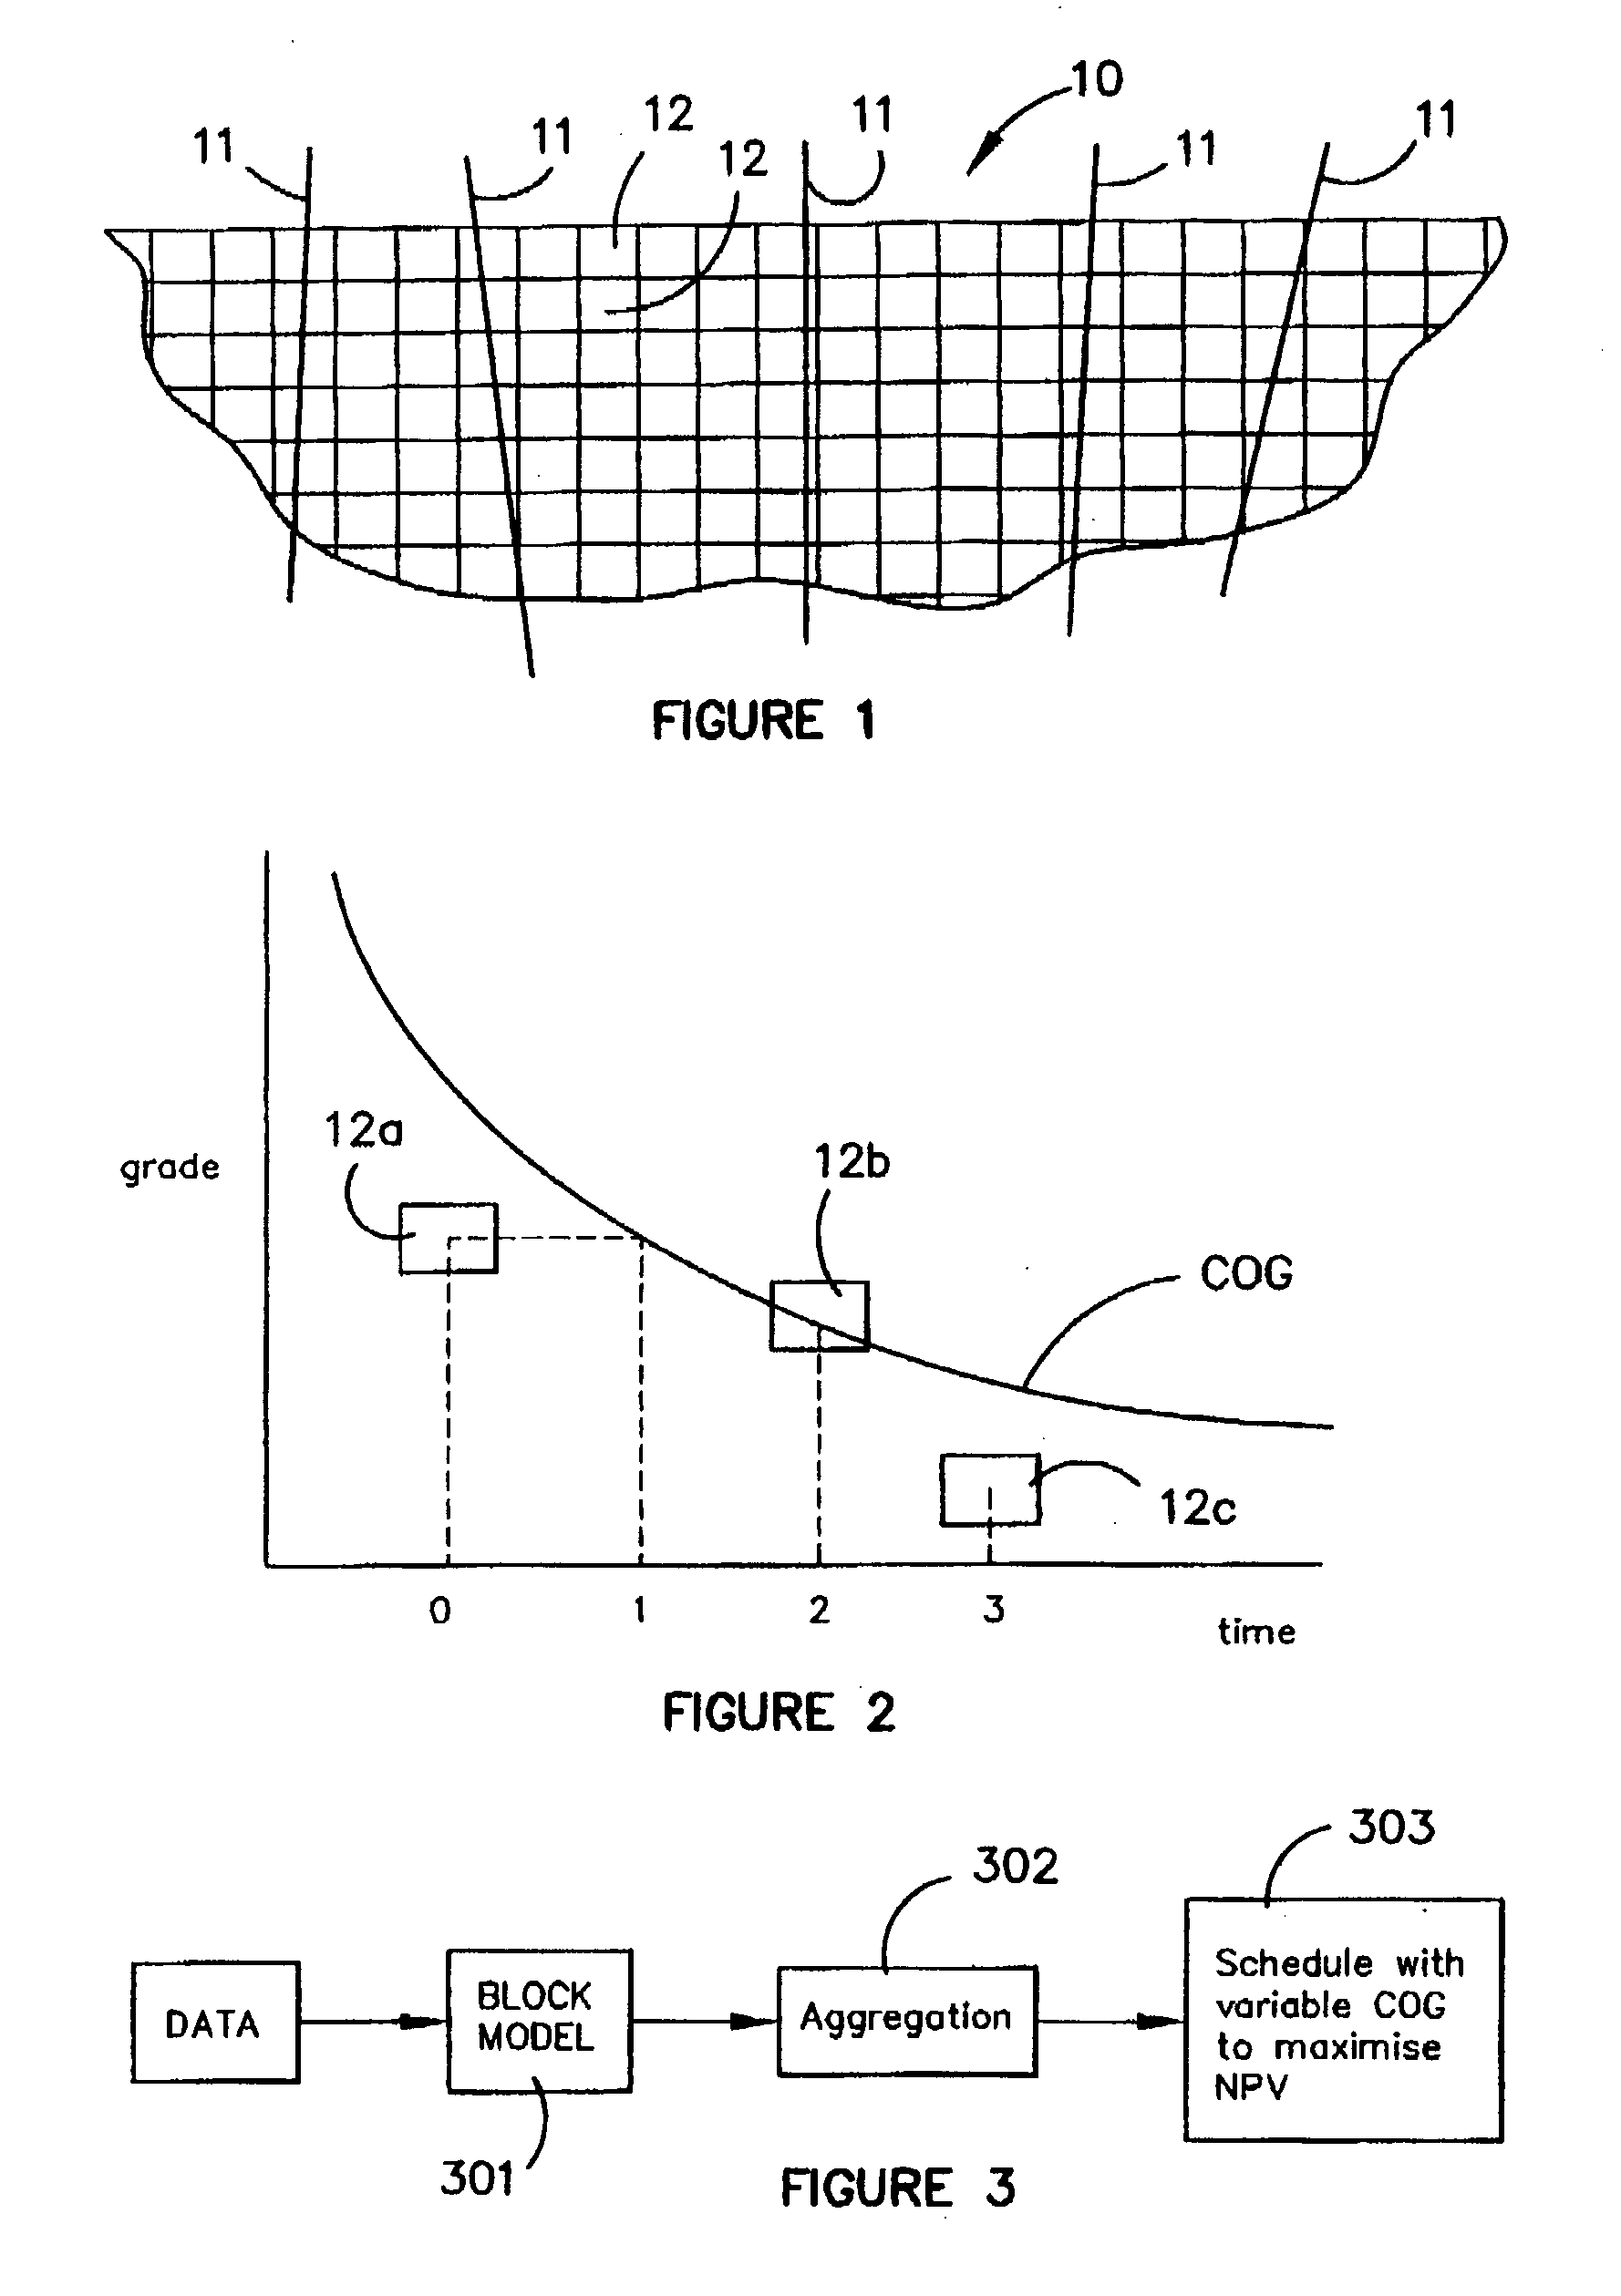 Method, apparatus and computer program for scheduling the extraction of a resource and for determining the net present value of an extraction schedule